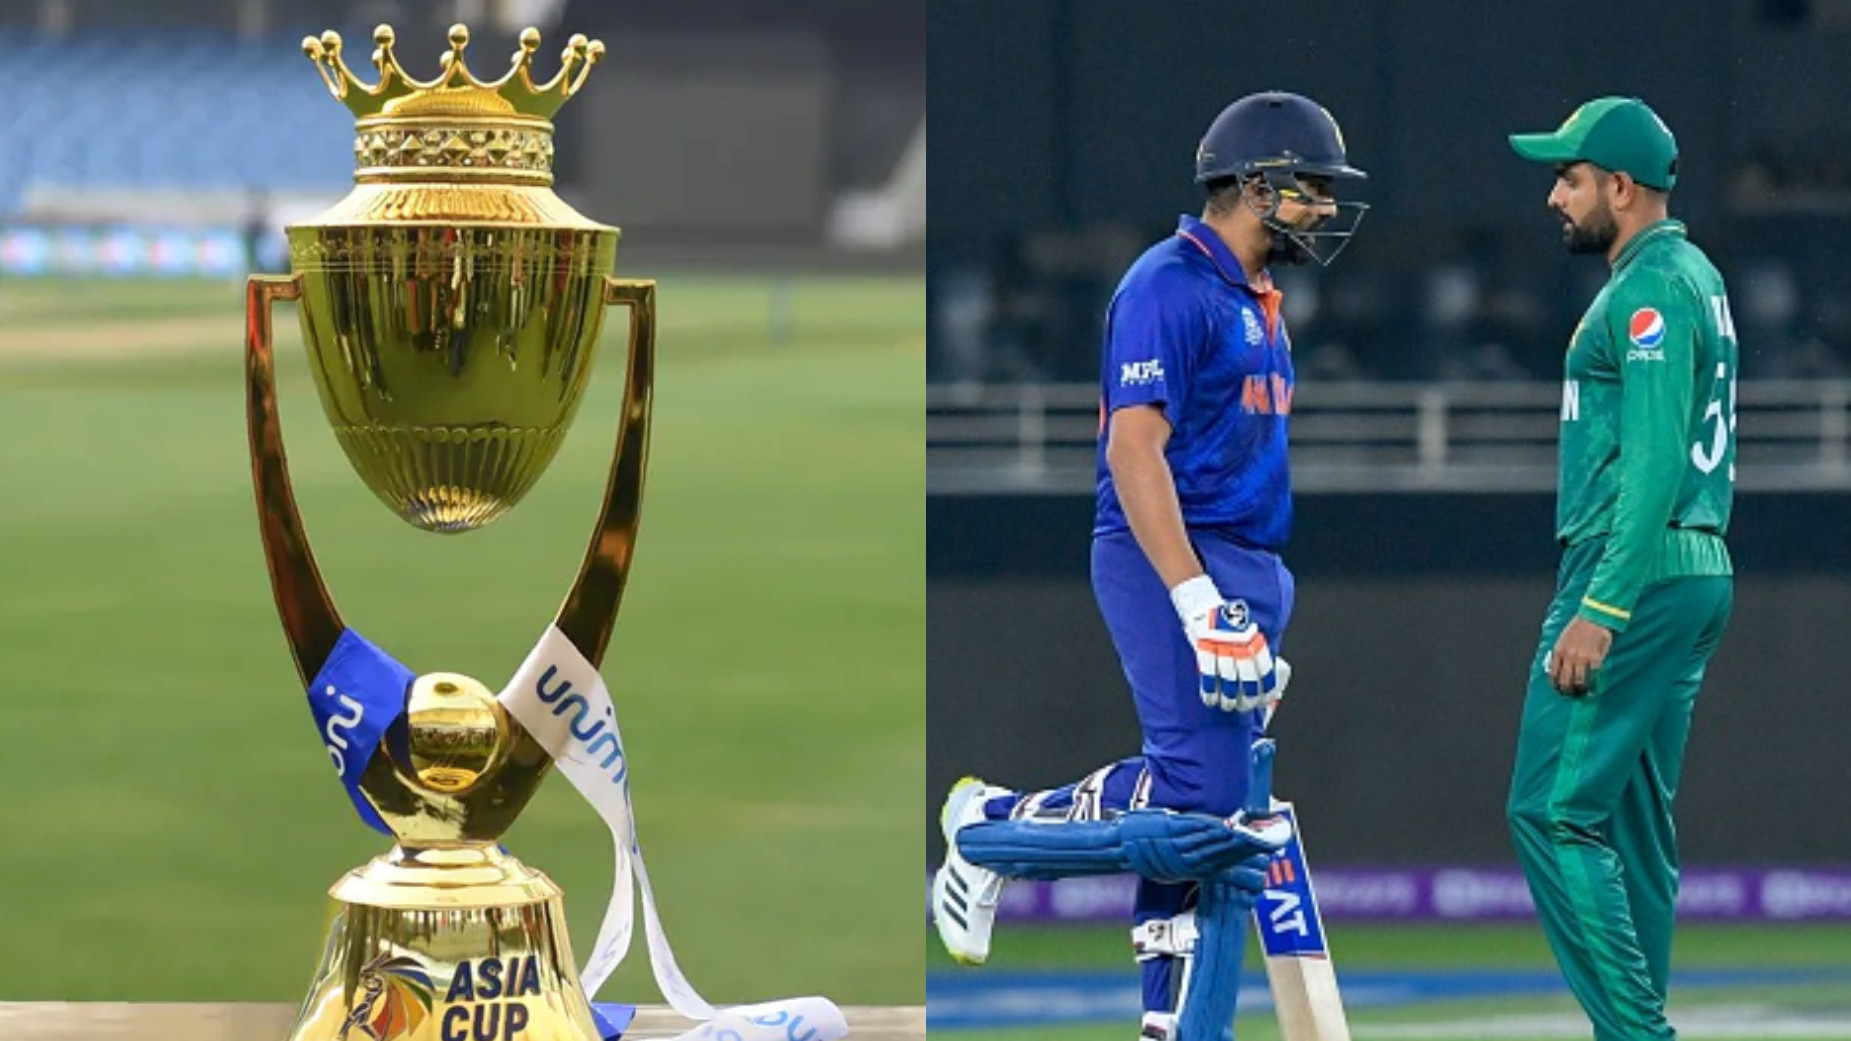 Asia Cup 2022 schedule revealed; India-Pakistan clash on August 28